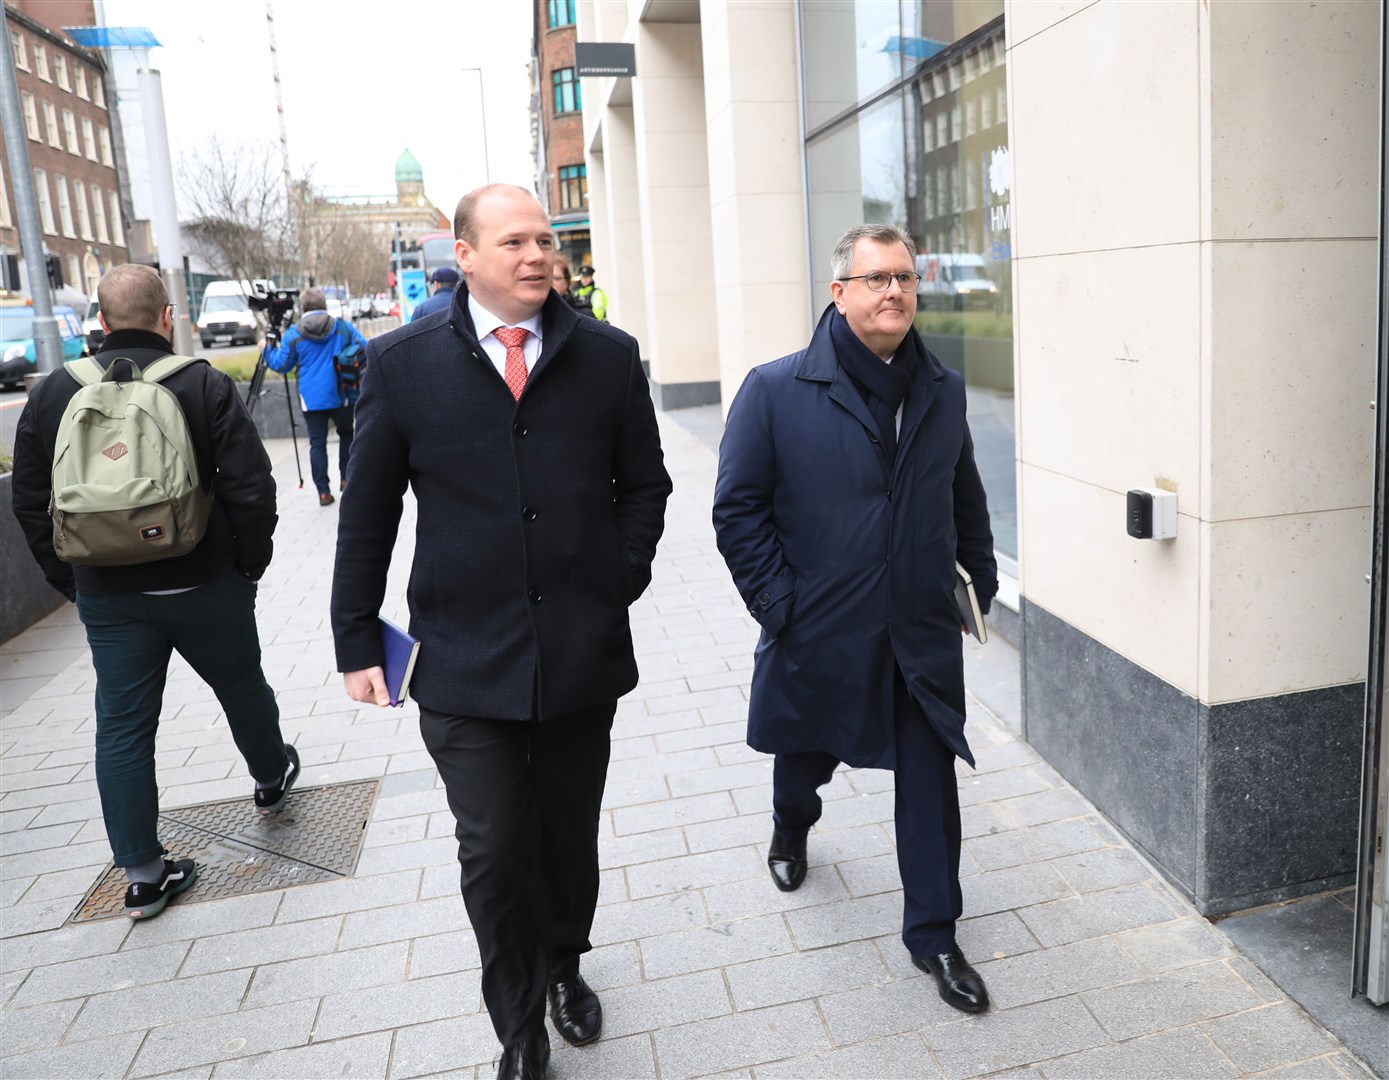 DUP leader Jeffrey Donaldson (right) and party member Gordon Lyons MLA arrive at government buildings in Belfast (Peter Morrison/PA)